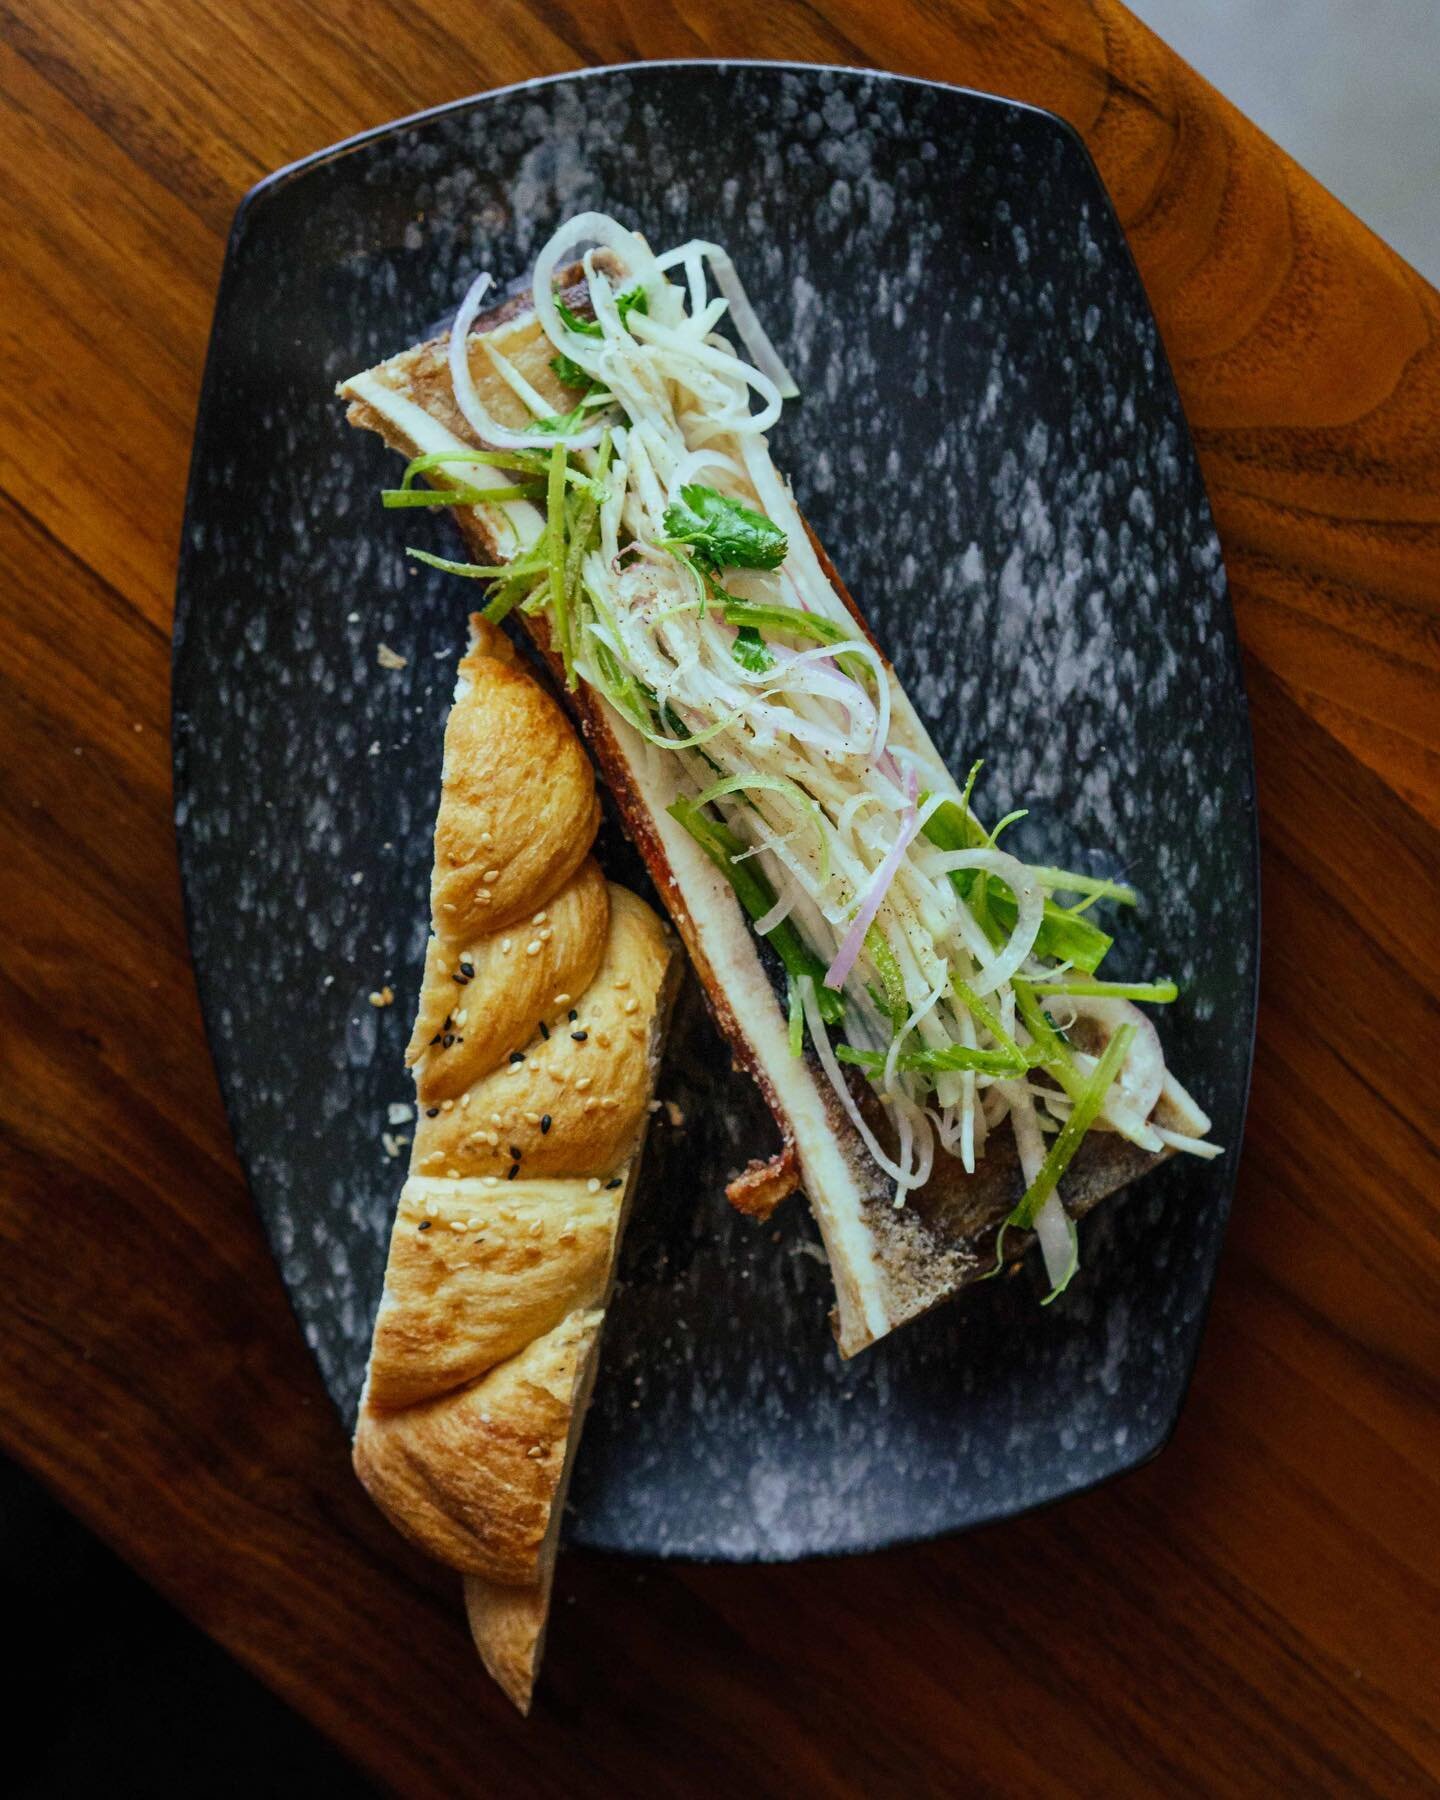 Our signature bone marrow is the comfort food you never knew you needed - topped with kohlrabi slaw and a hearty serve of warm, house-baked bread.

And in the Bartholomew spirit, every serve of marrow is accompanied by your choice of a cognac or bour